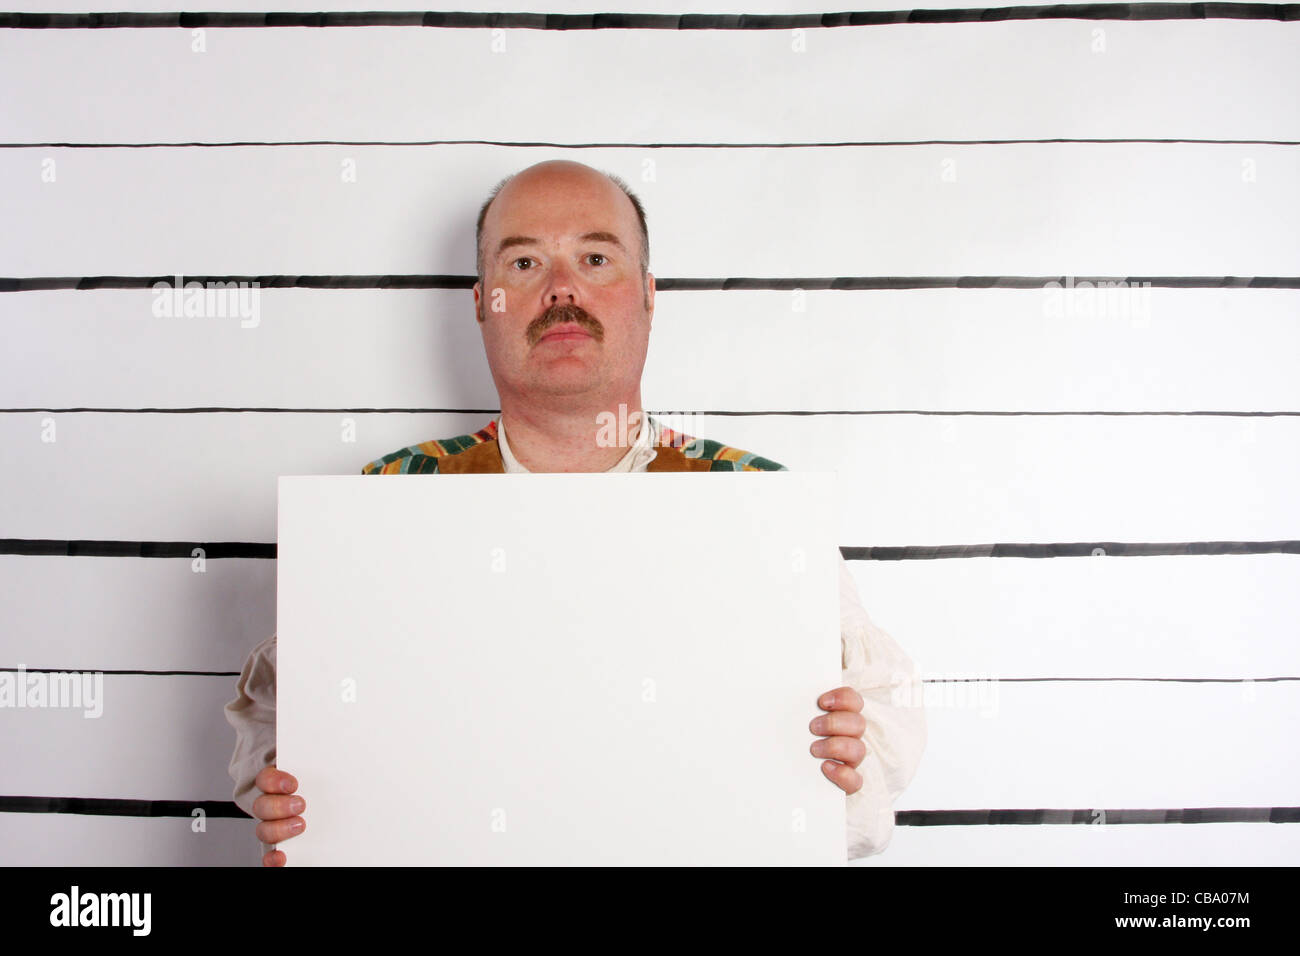 A prisoner holding a sign for a booking mugshot Stock Photo 41401688